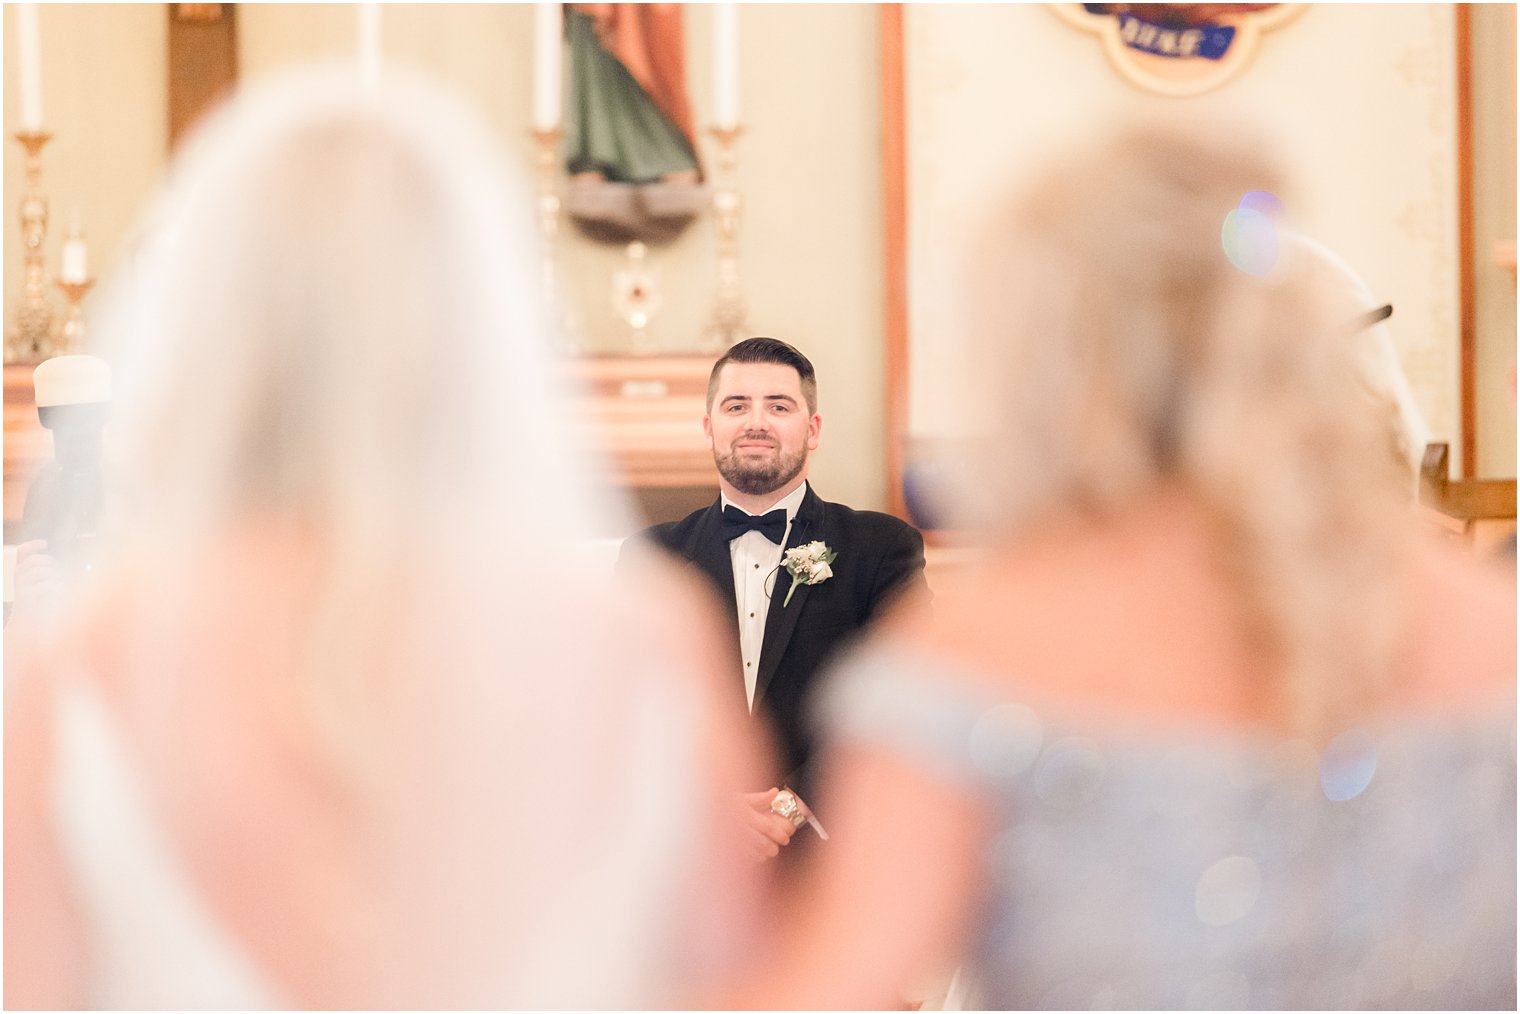 groom tears up watching bride walk down aisle for wedding ceremony 